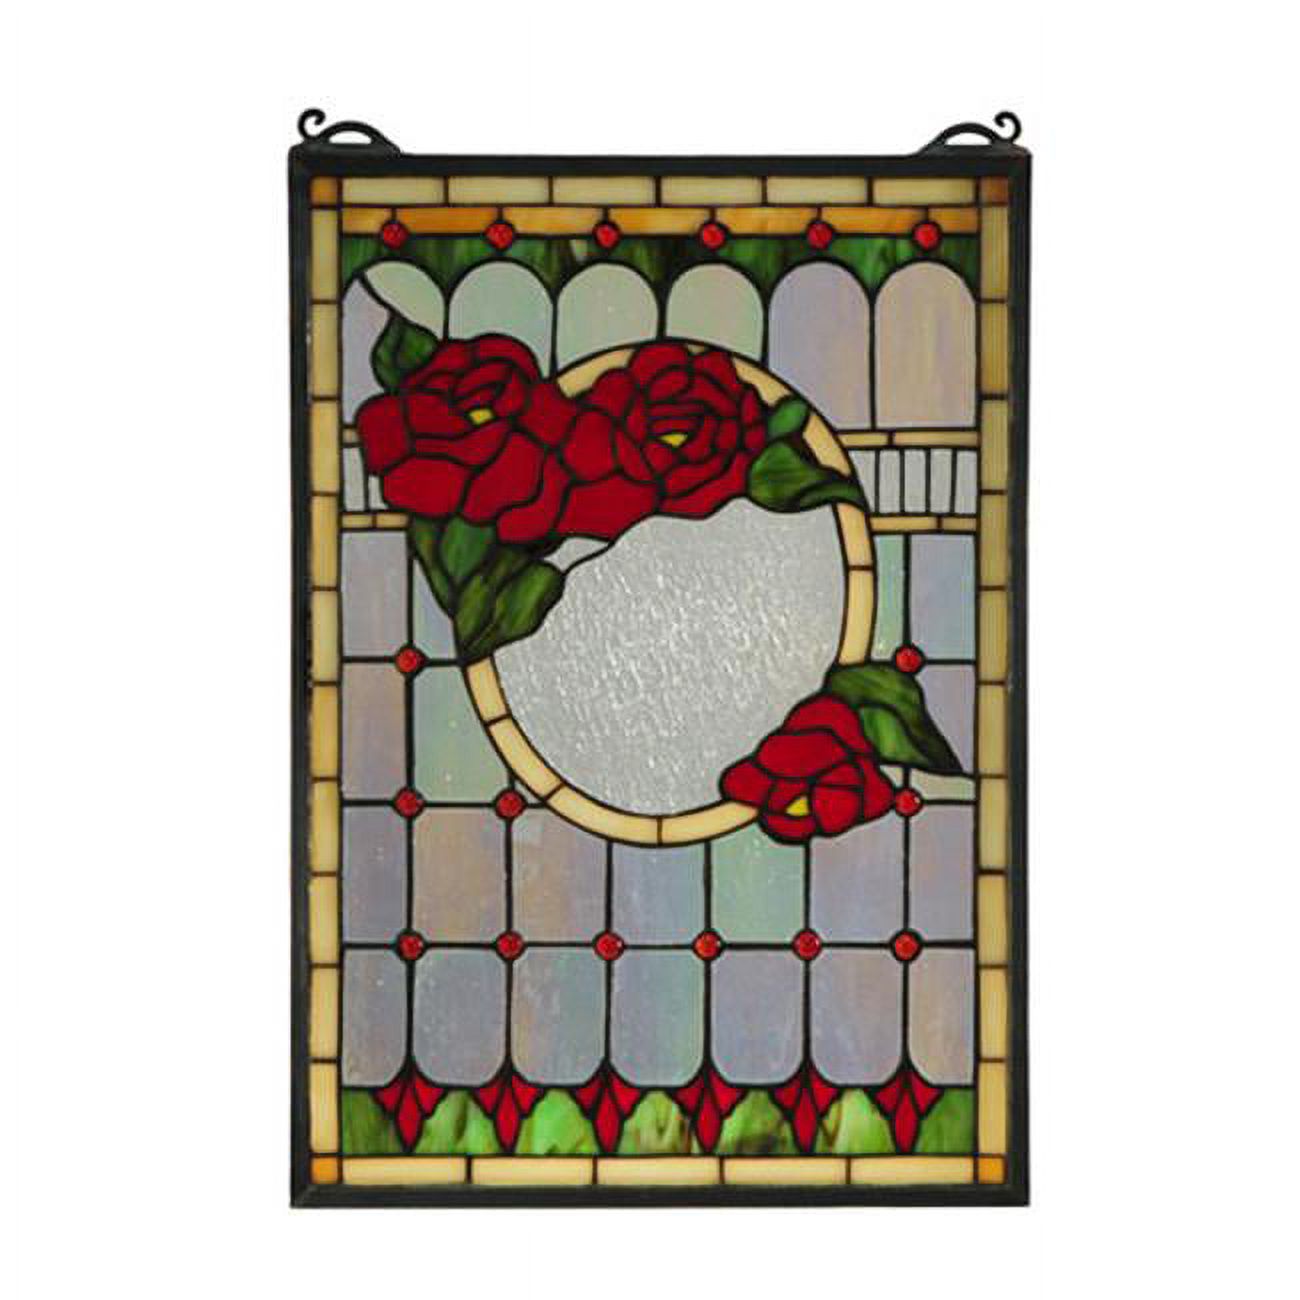 MEYDA  14 in. W x 20 in. H Morgan Rose Stained Glass Window - image 1 of 2